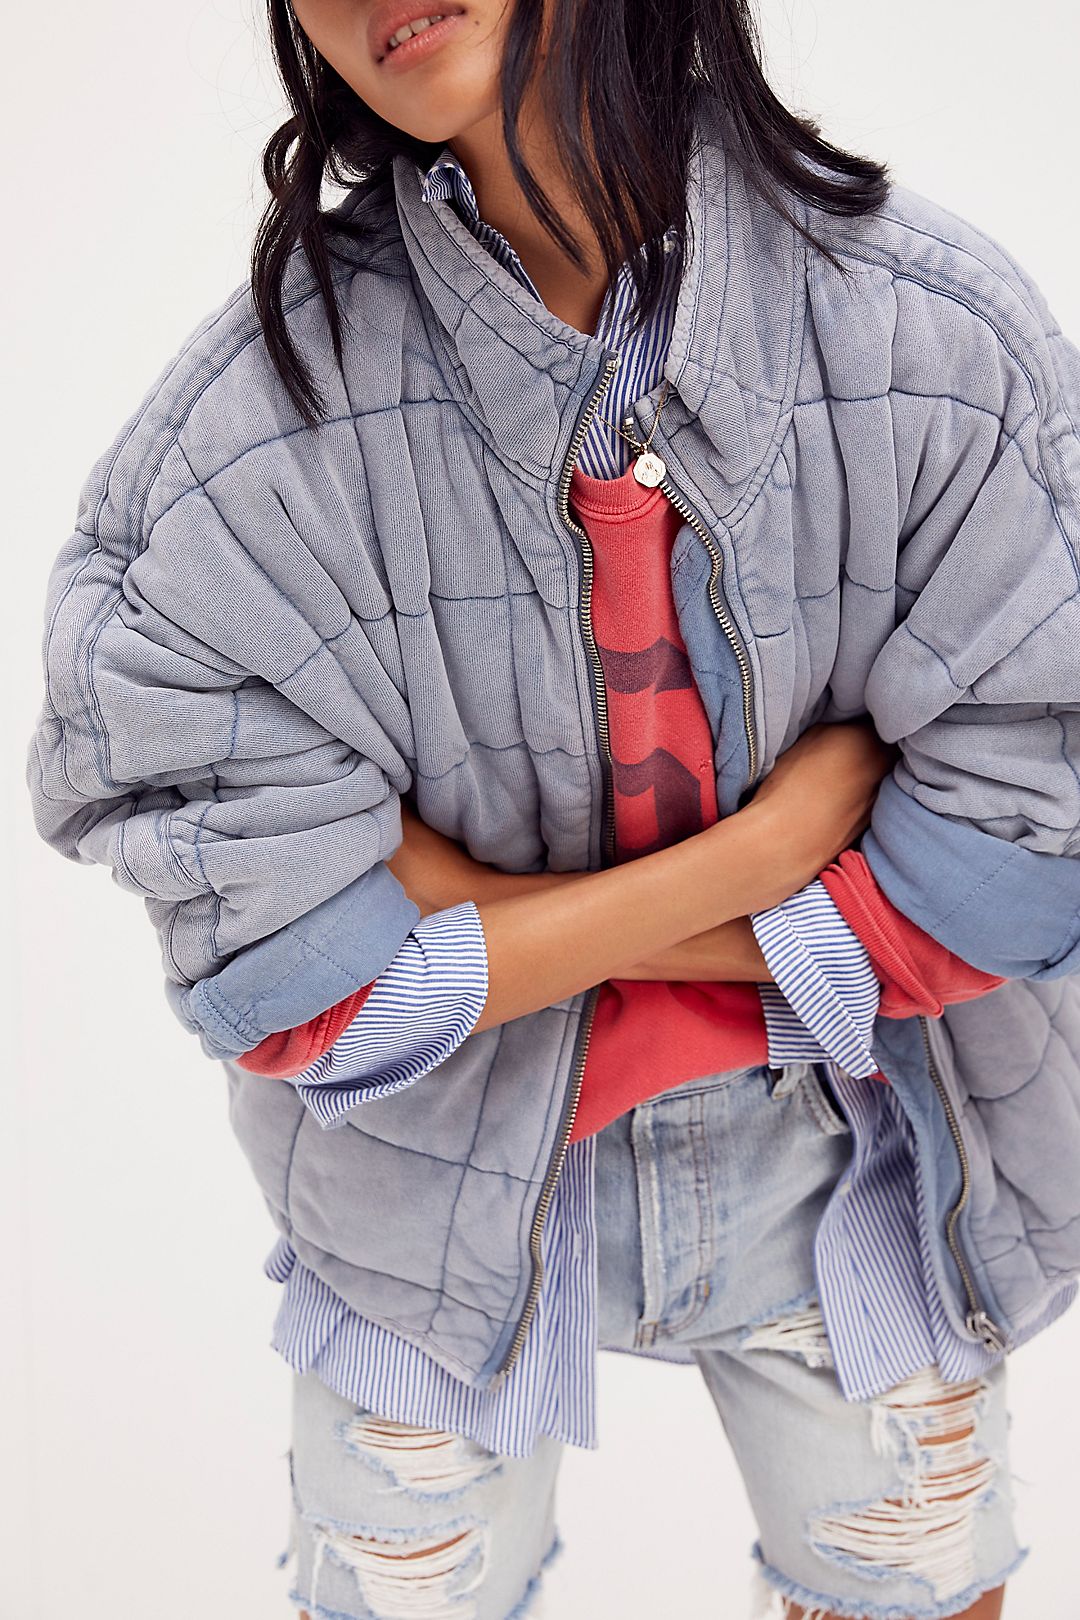 Dolman Quilted Jacket Free People